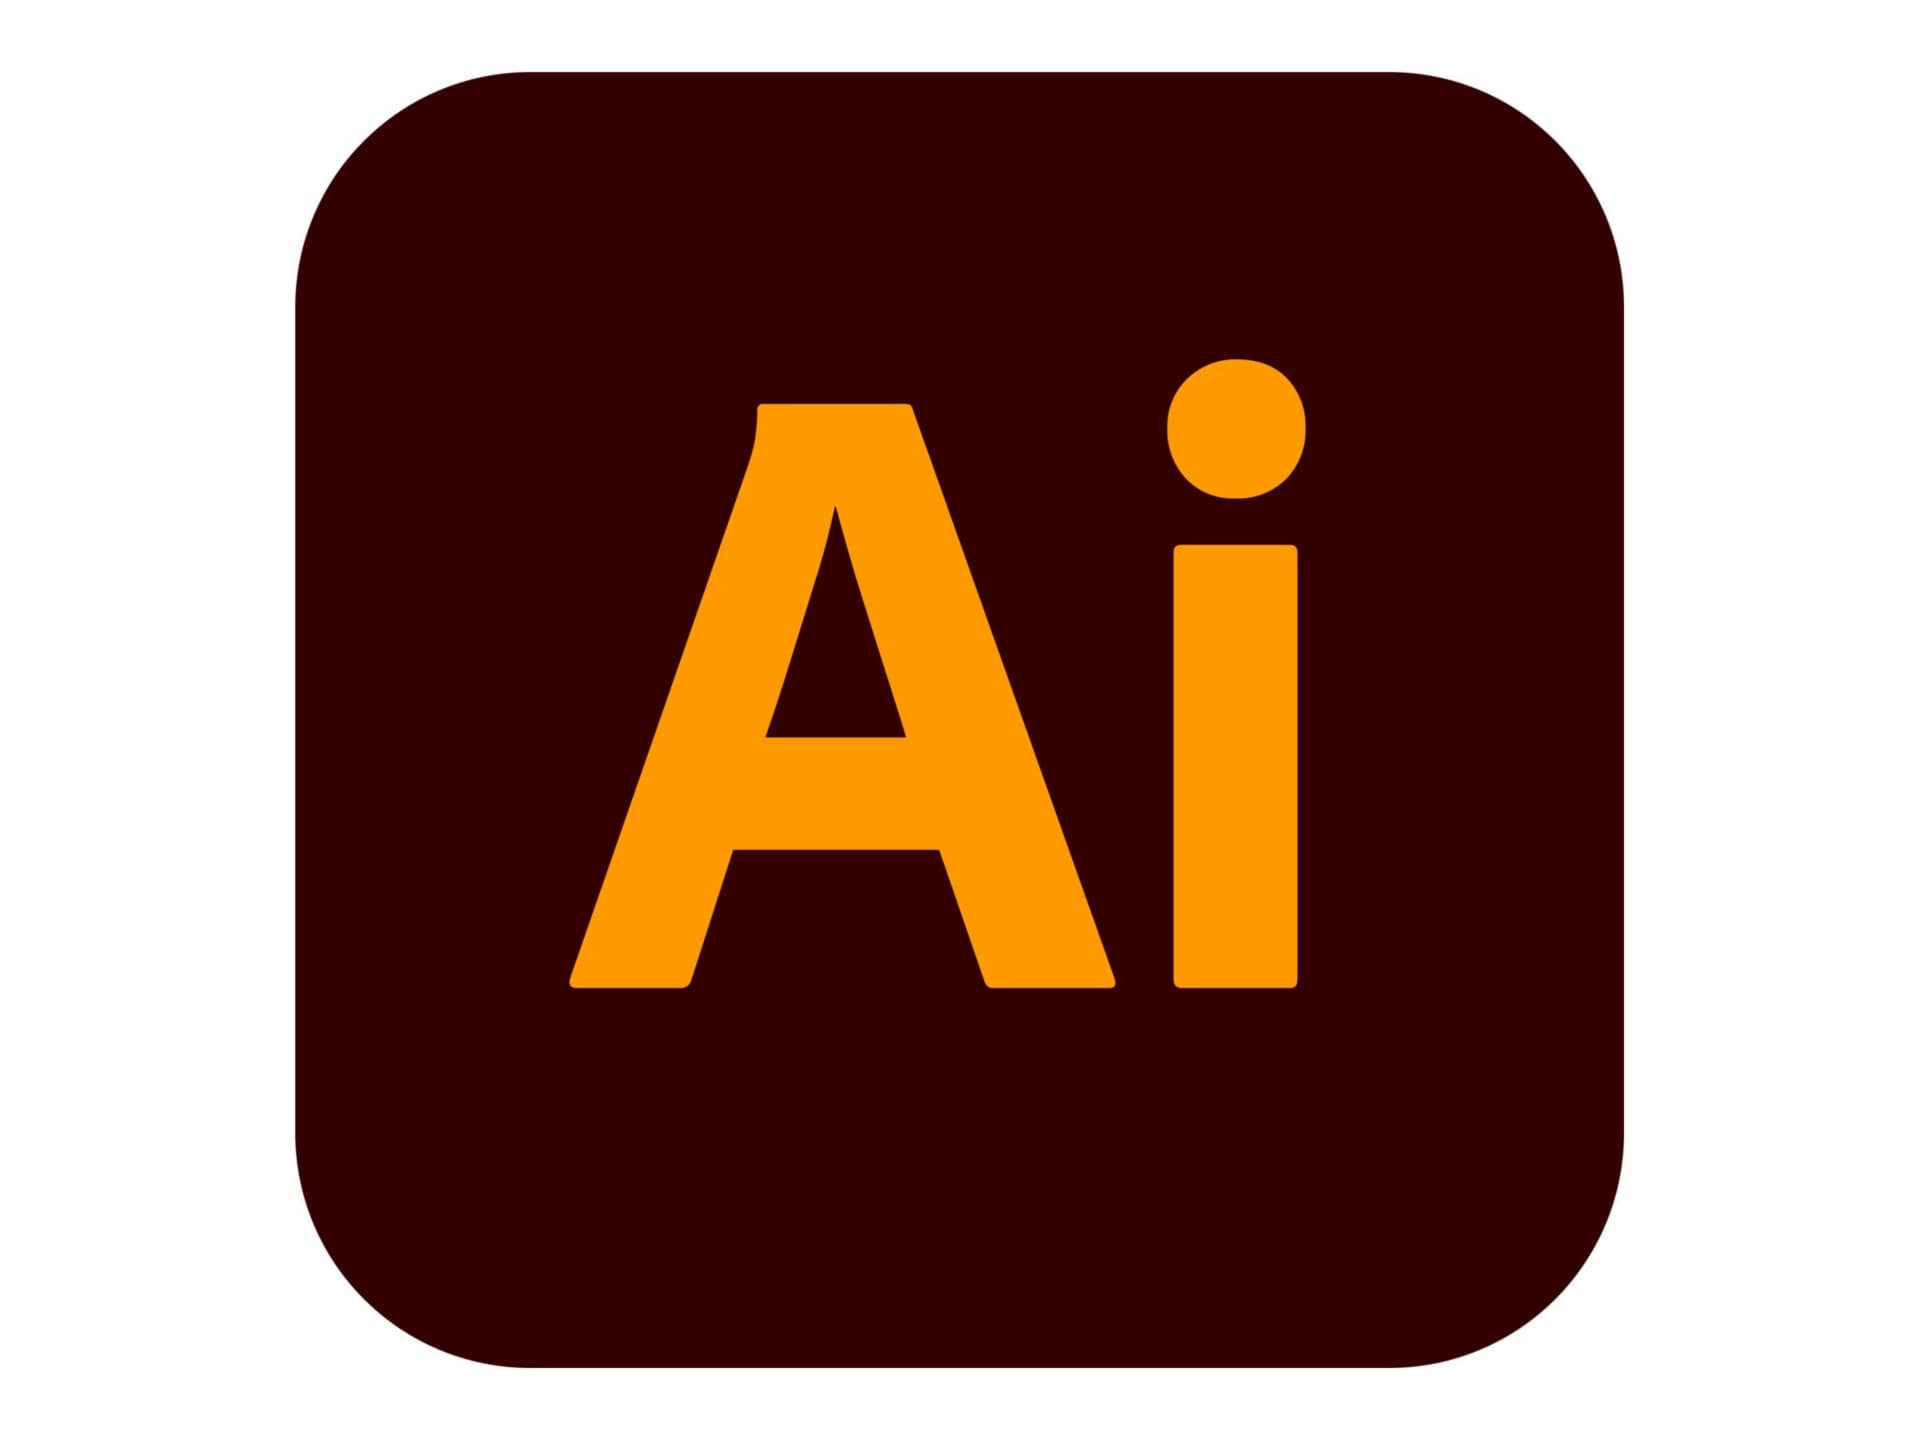 Adobe Illustrator CC for teams - Subscription New (11 months) - 1 named user